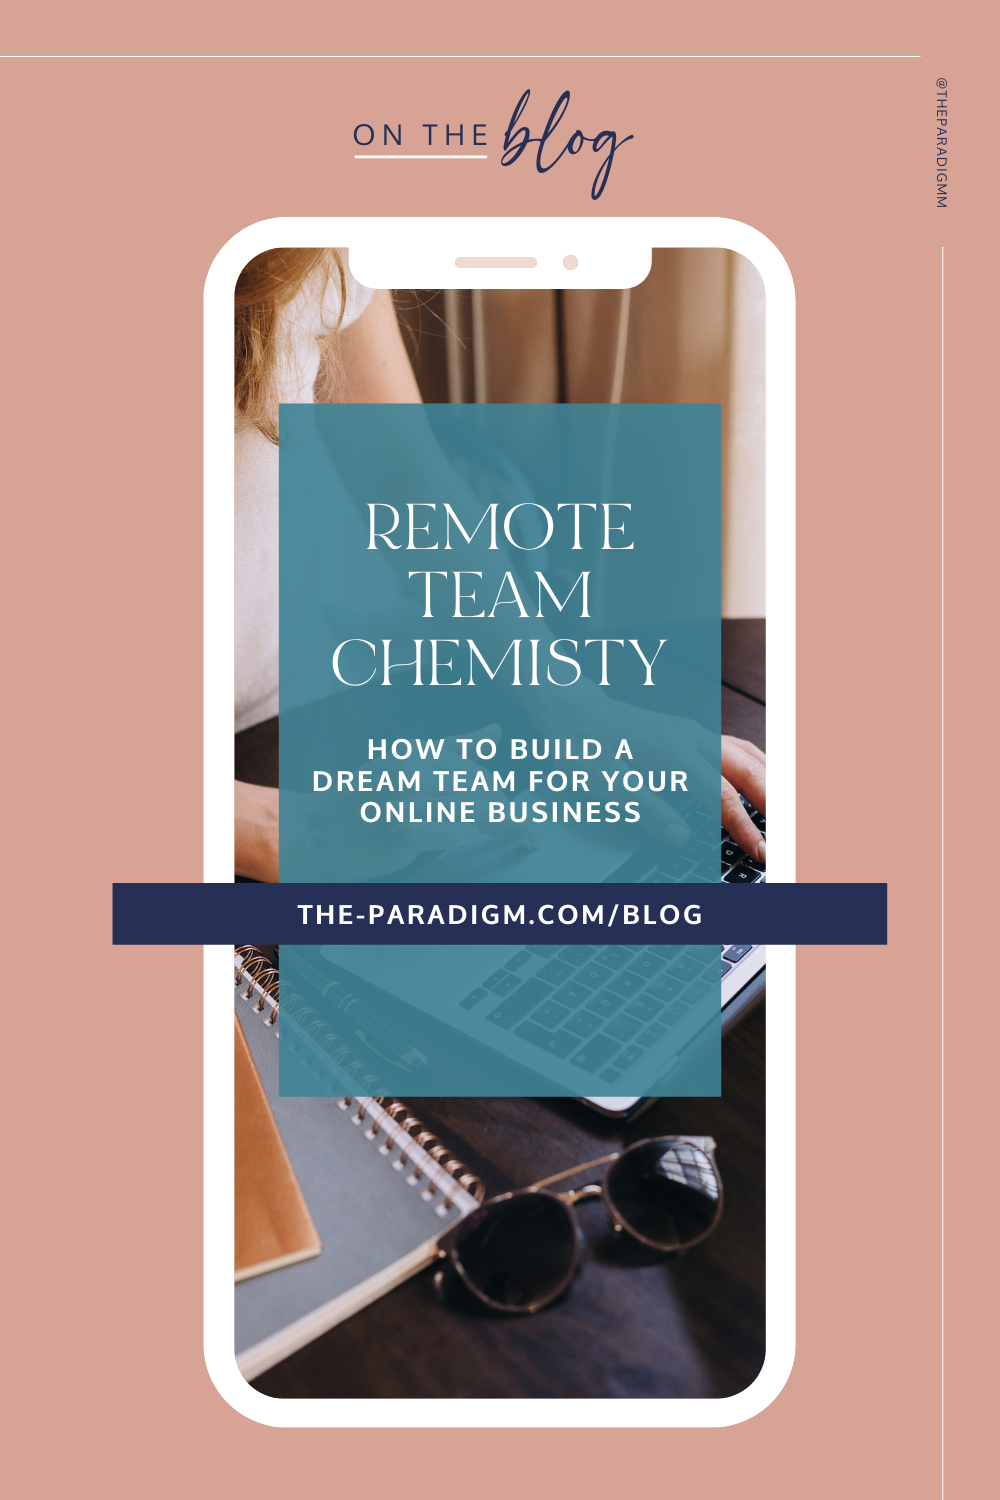 On the blog remote team chemistry how to build a team for your online business 